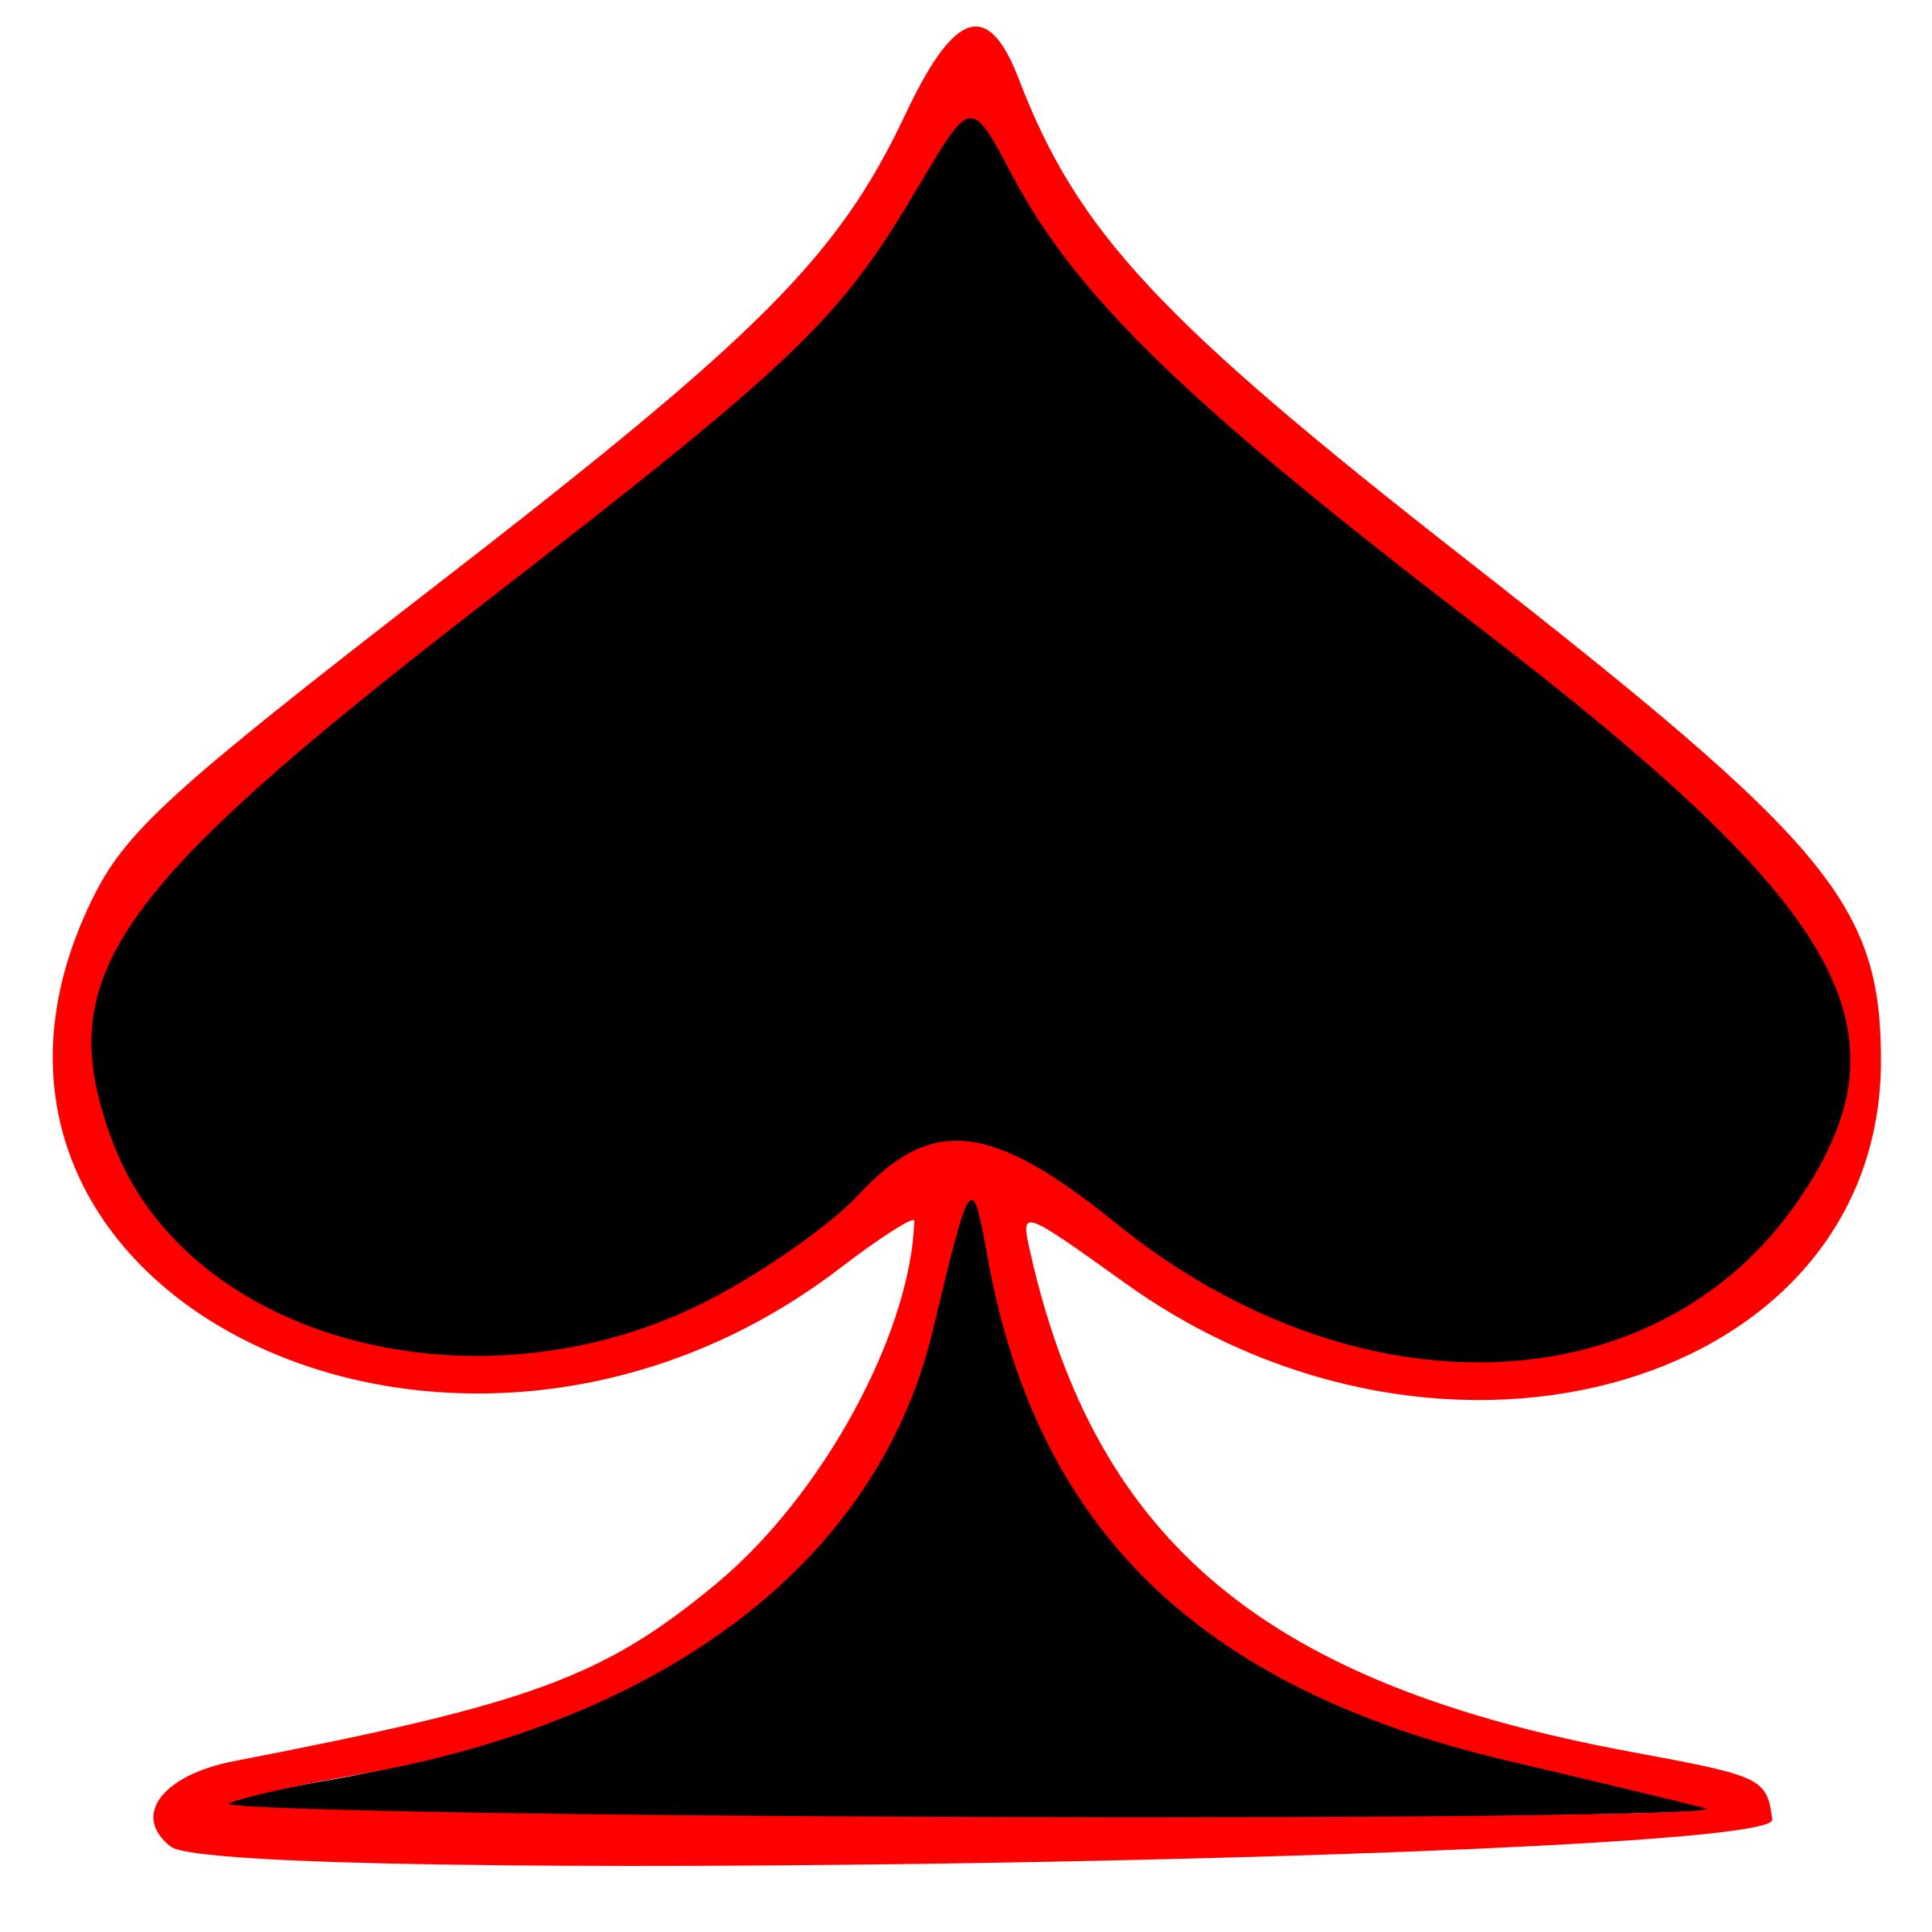 Outlined Spade Playing Card Symbol png